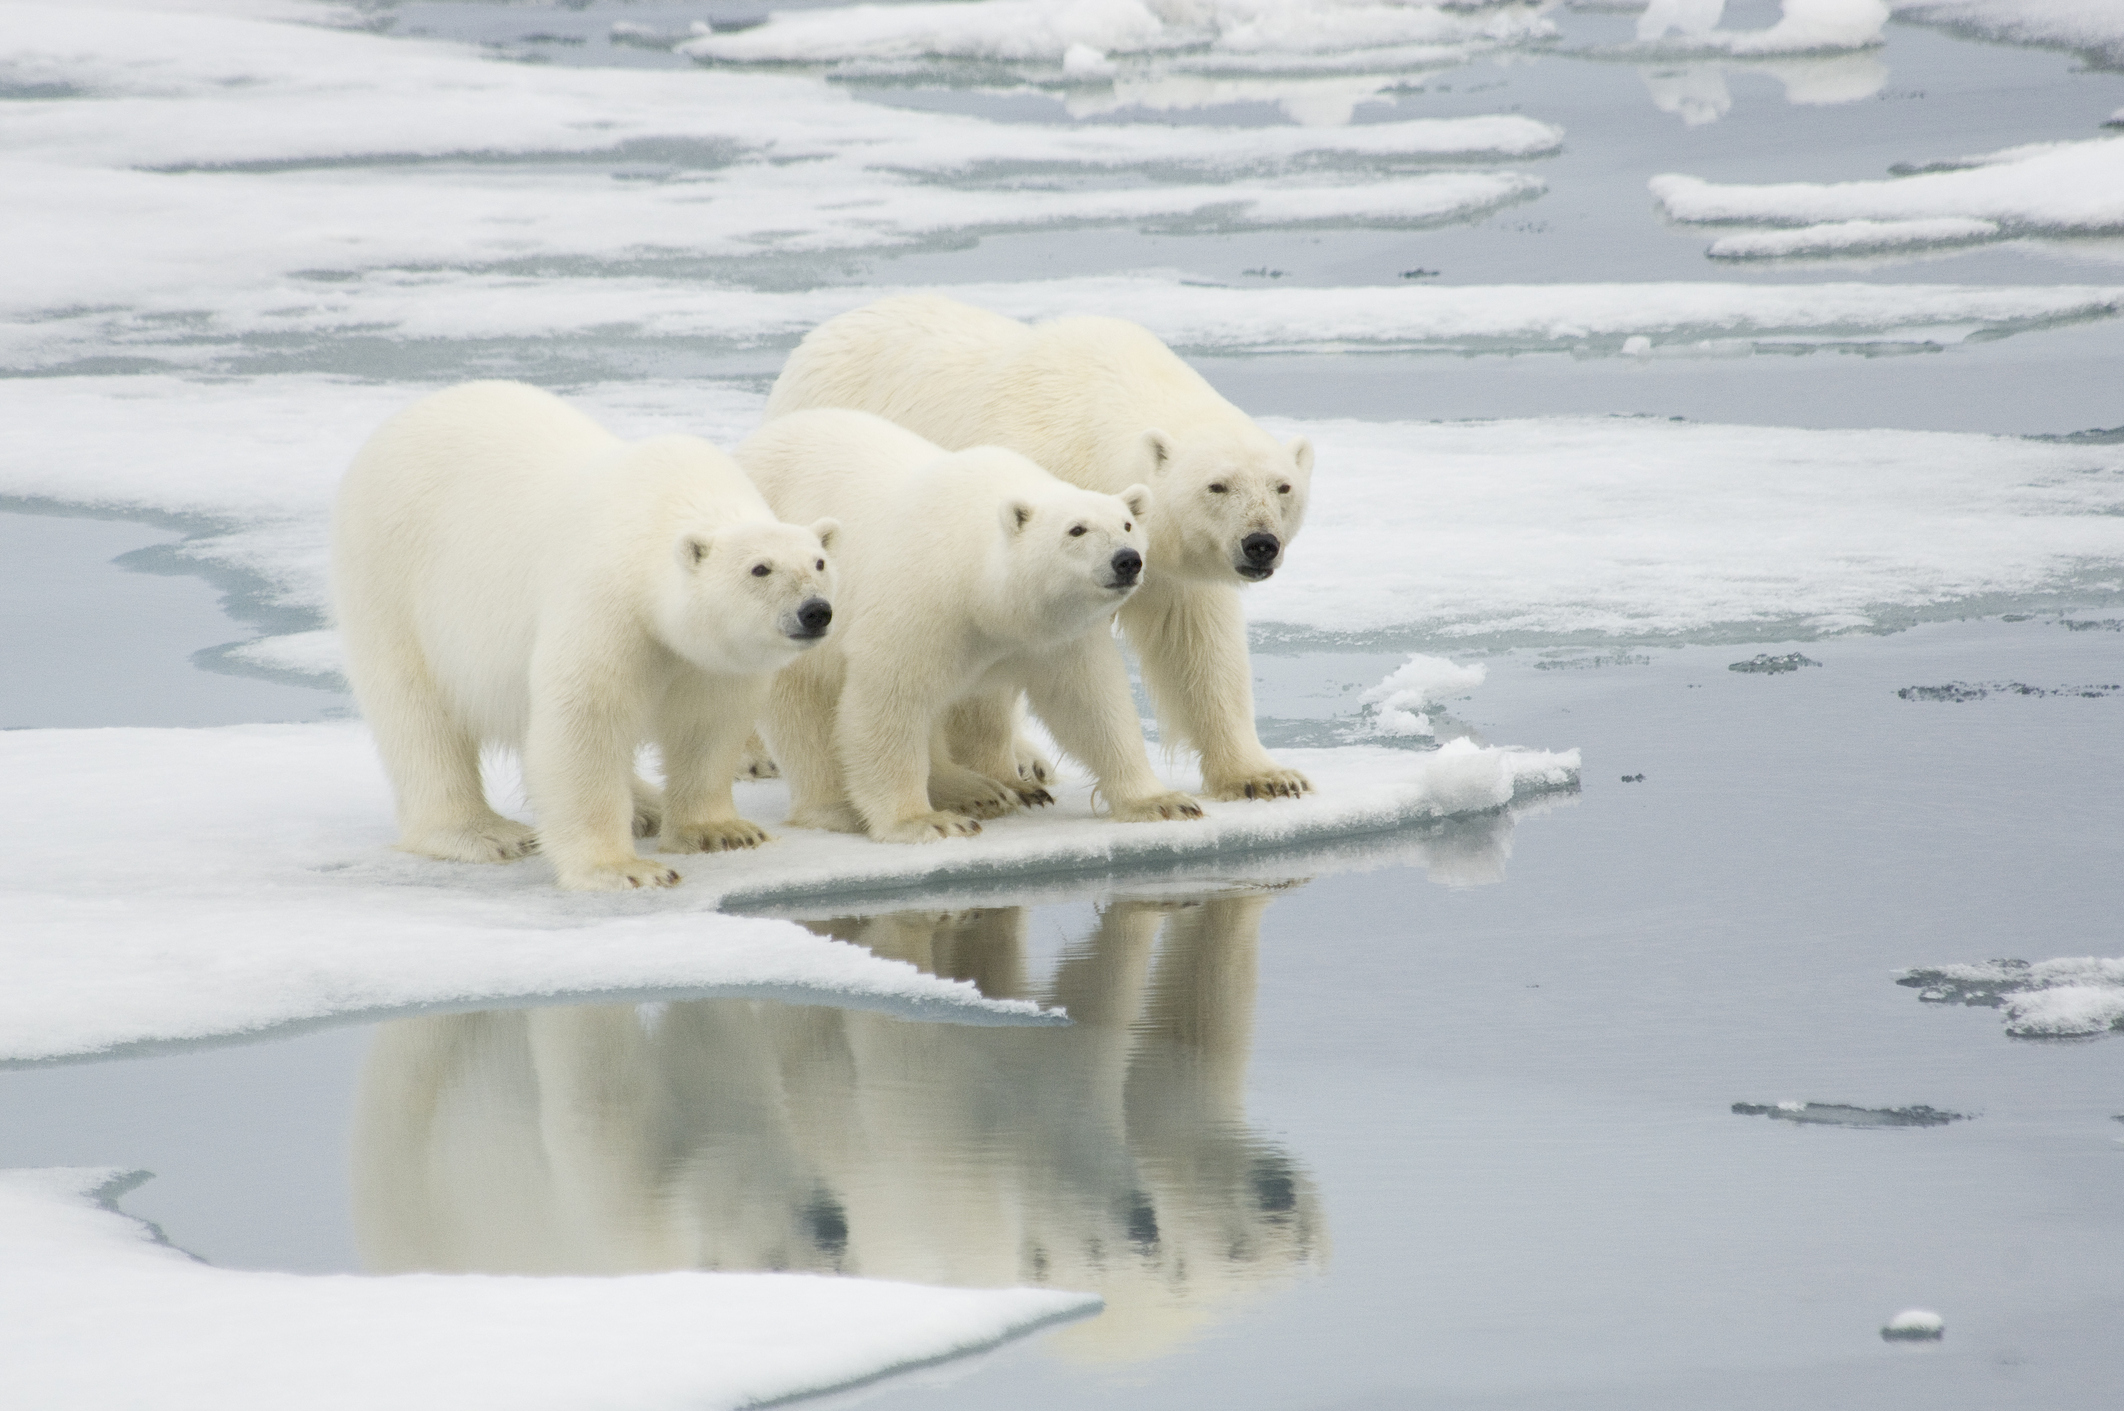 Why Do Polar Bears Need Ice to Survive?